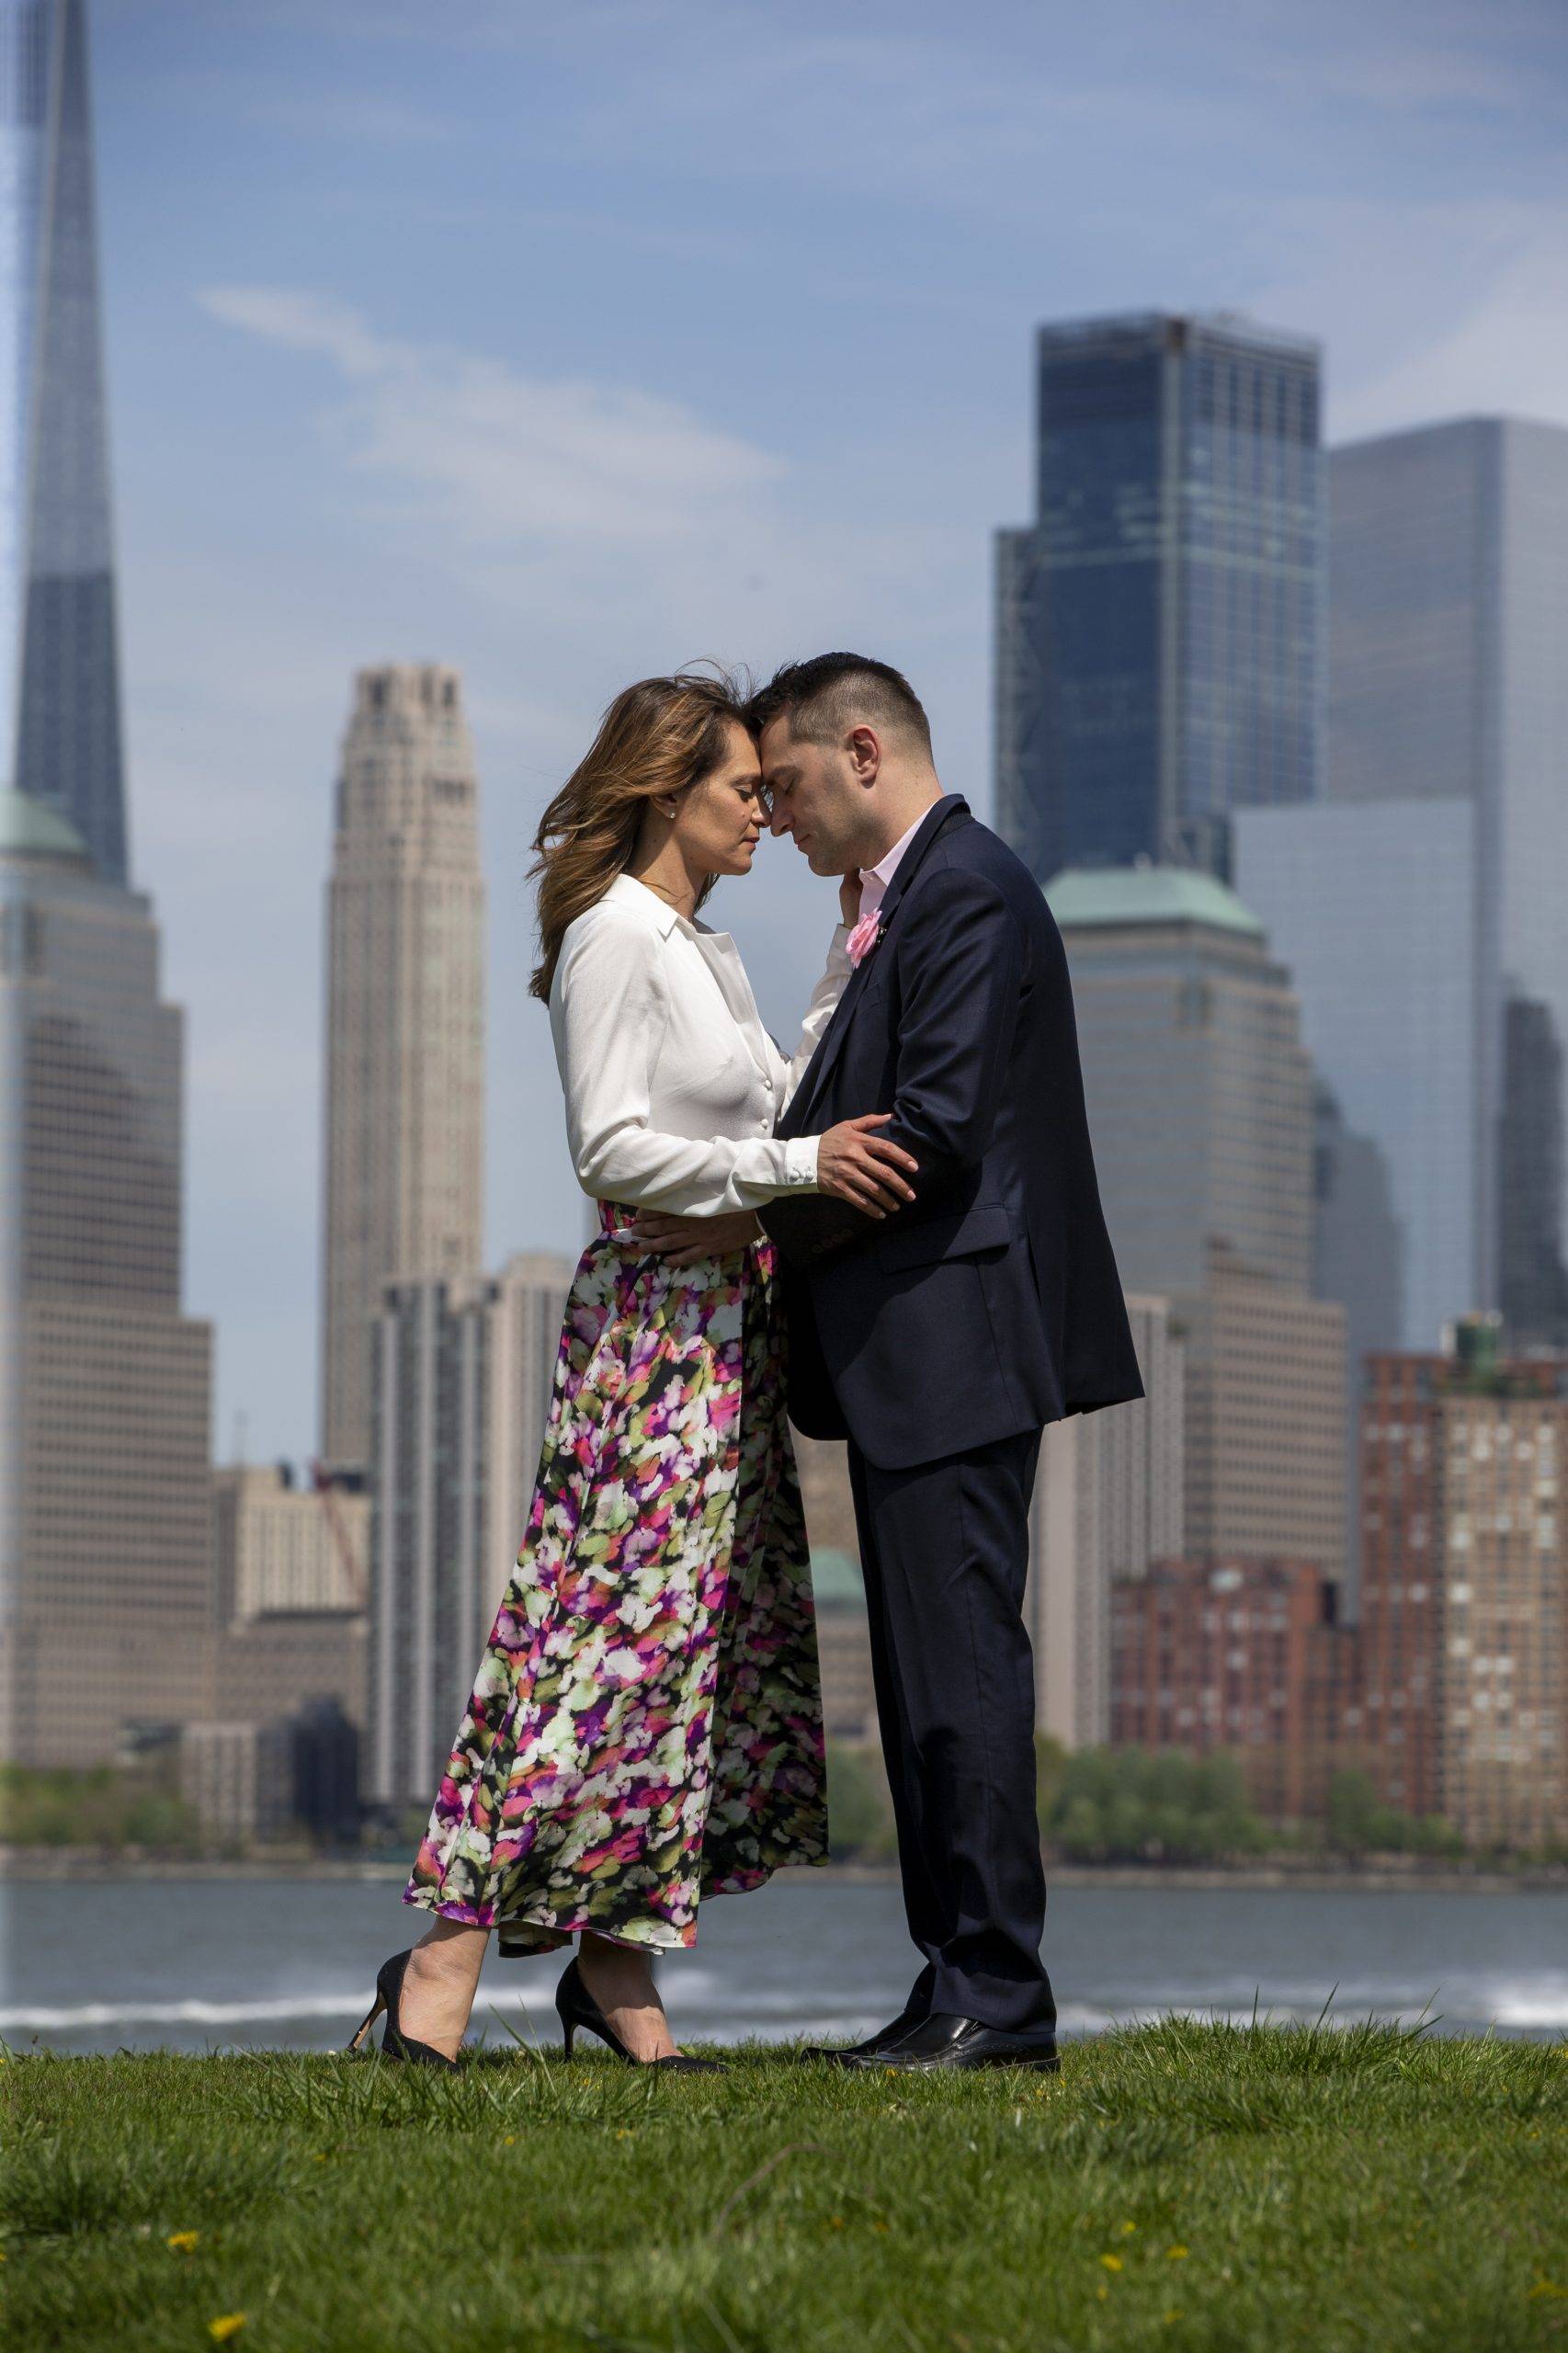 A couple embracing in front of a city skyline.